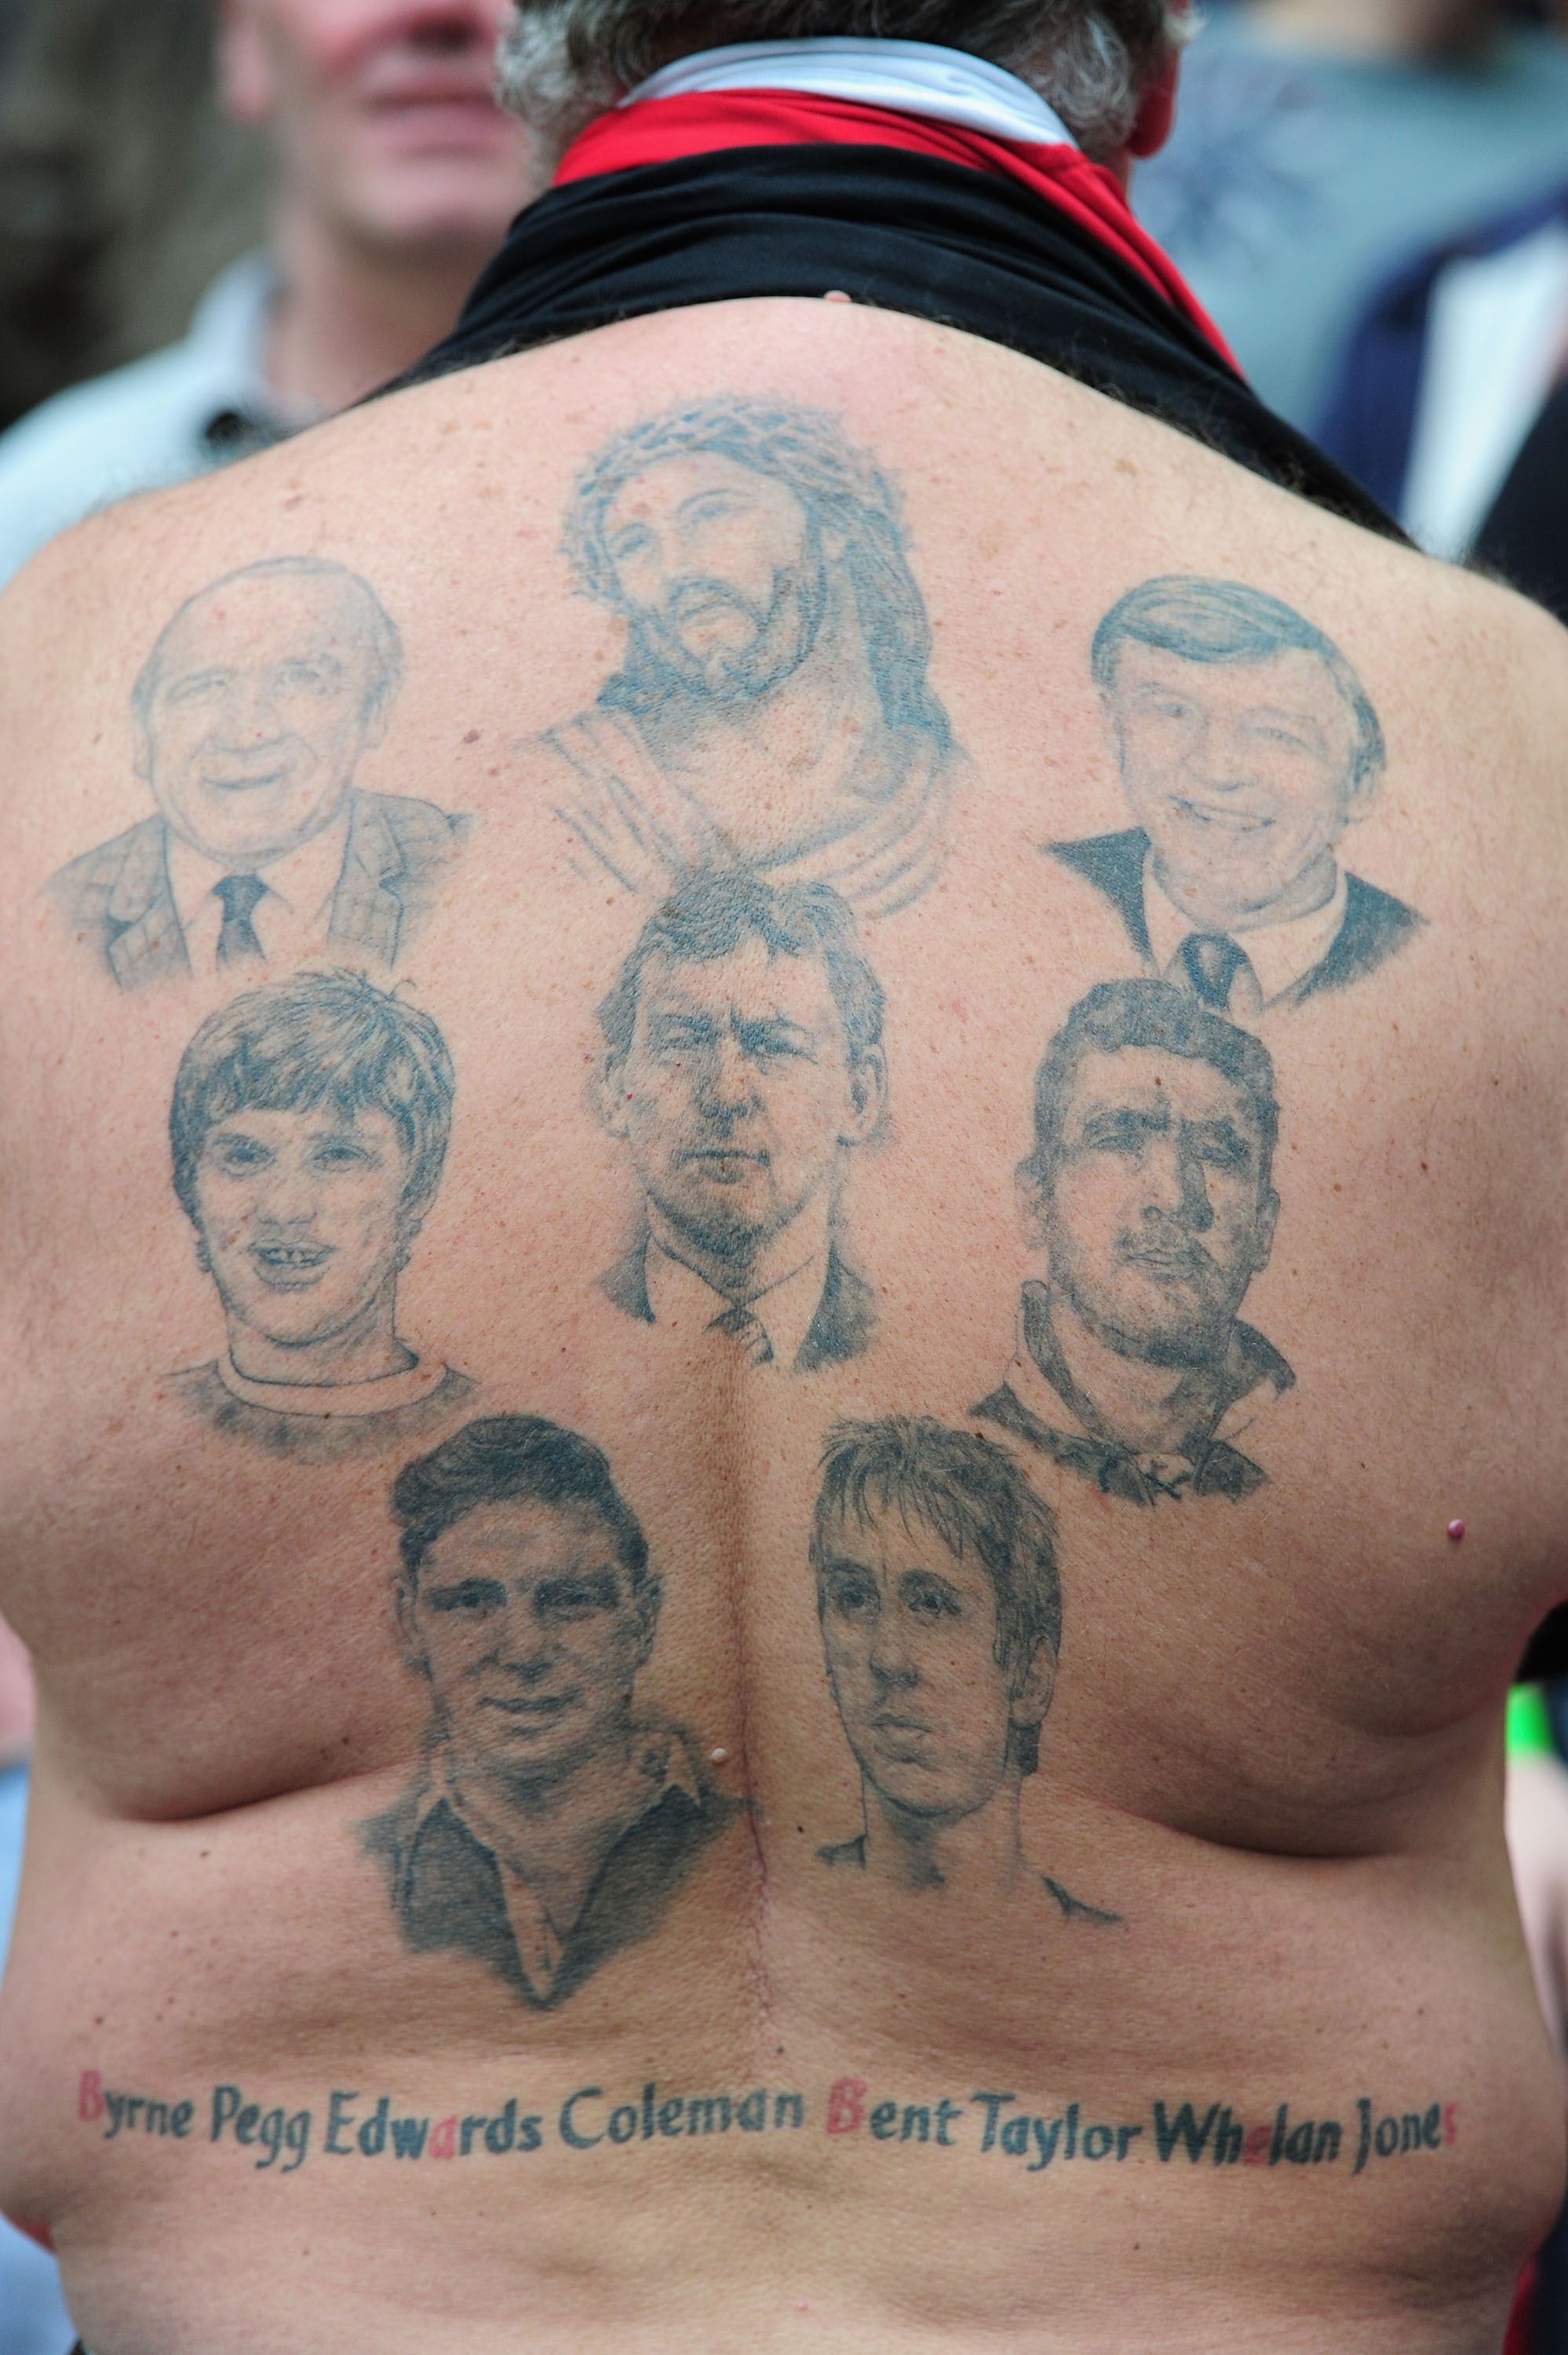 LONDON, ENGLAND - APRIL 16: A Man United fan shows his tattoos of Manchester United 'legends' during the FA Cup sponsored by E.ON semi final match between Manchester City and Manchester United at Wembley Stadium on April 16, 2011 in London, England. (Photo by Jamie McDonald/Getty Images)